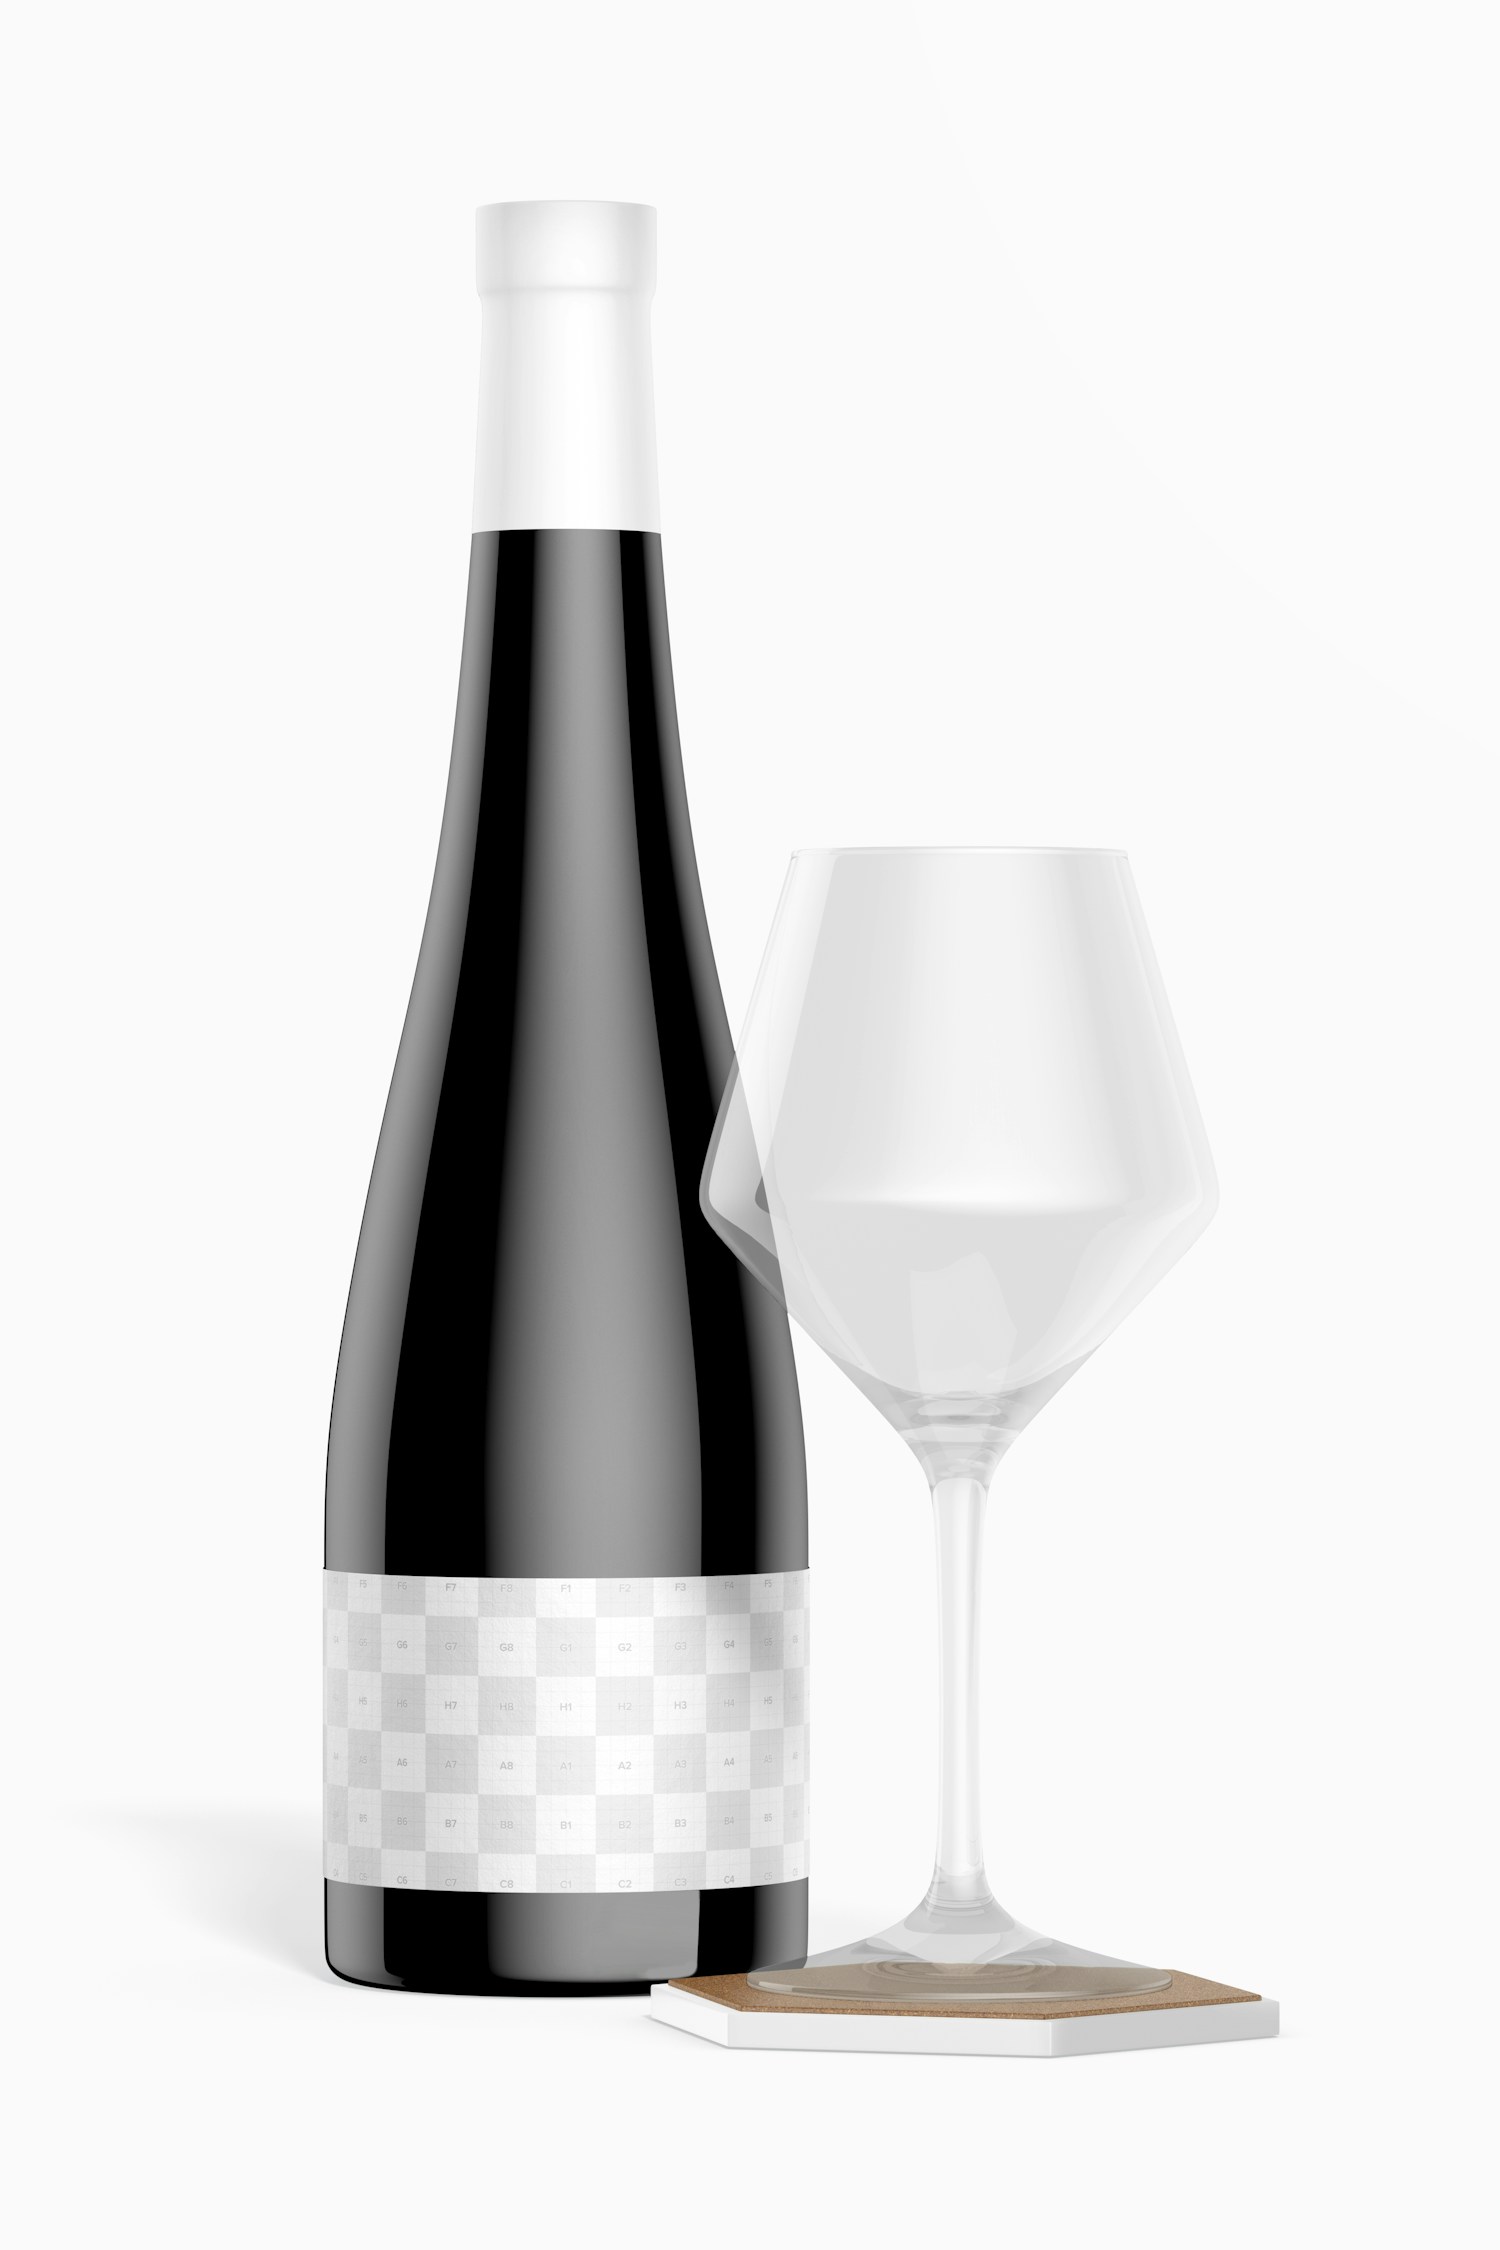 Champagne Bottle Mockup, with Cup